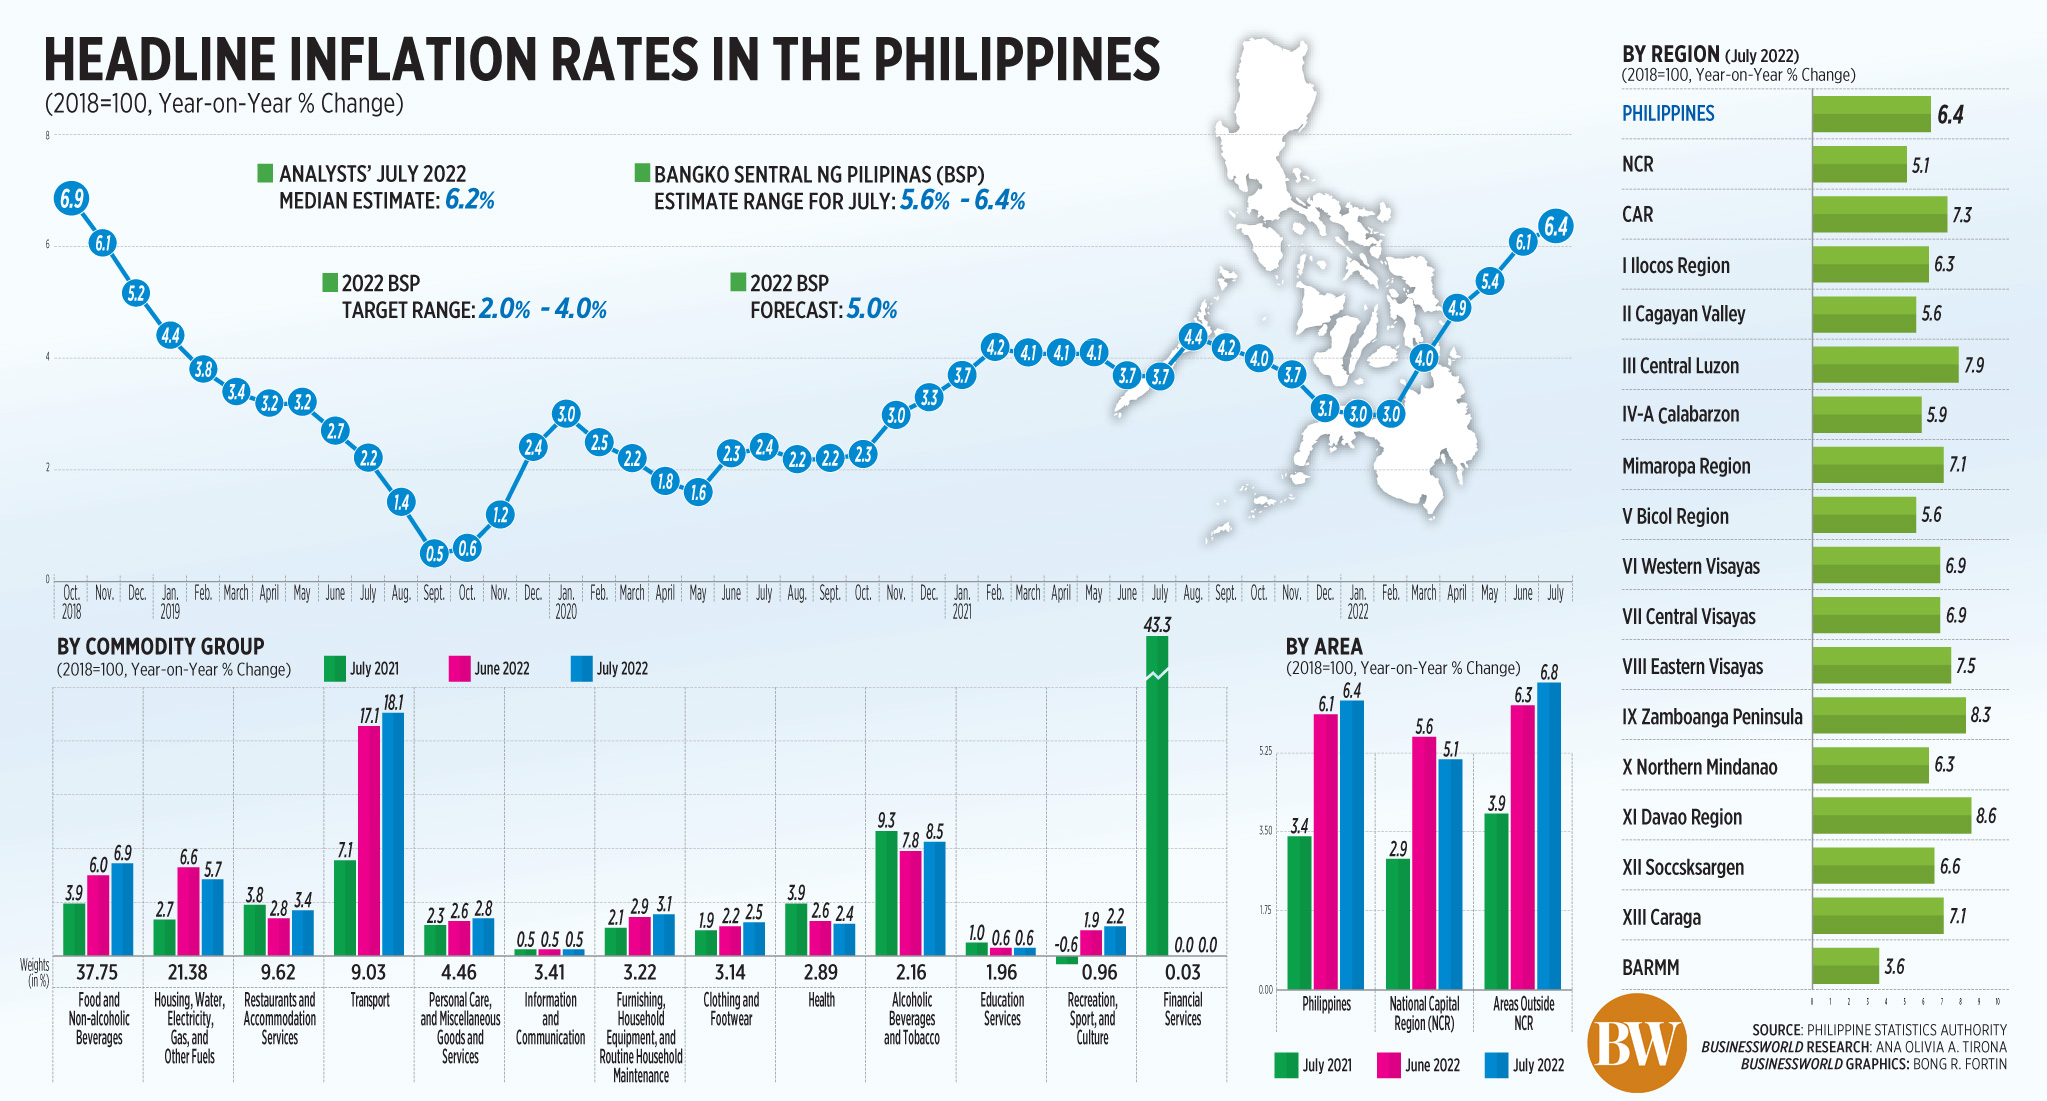 Headline inflation rates in the Philippines (July 2022)